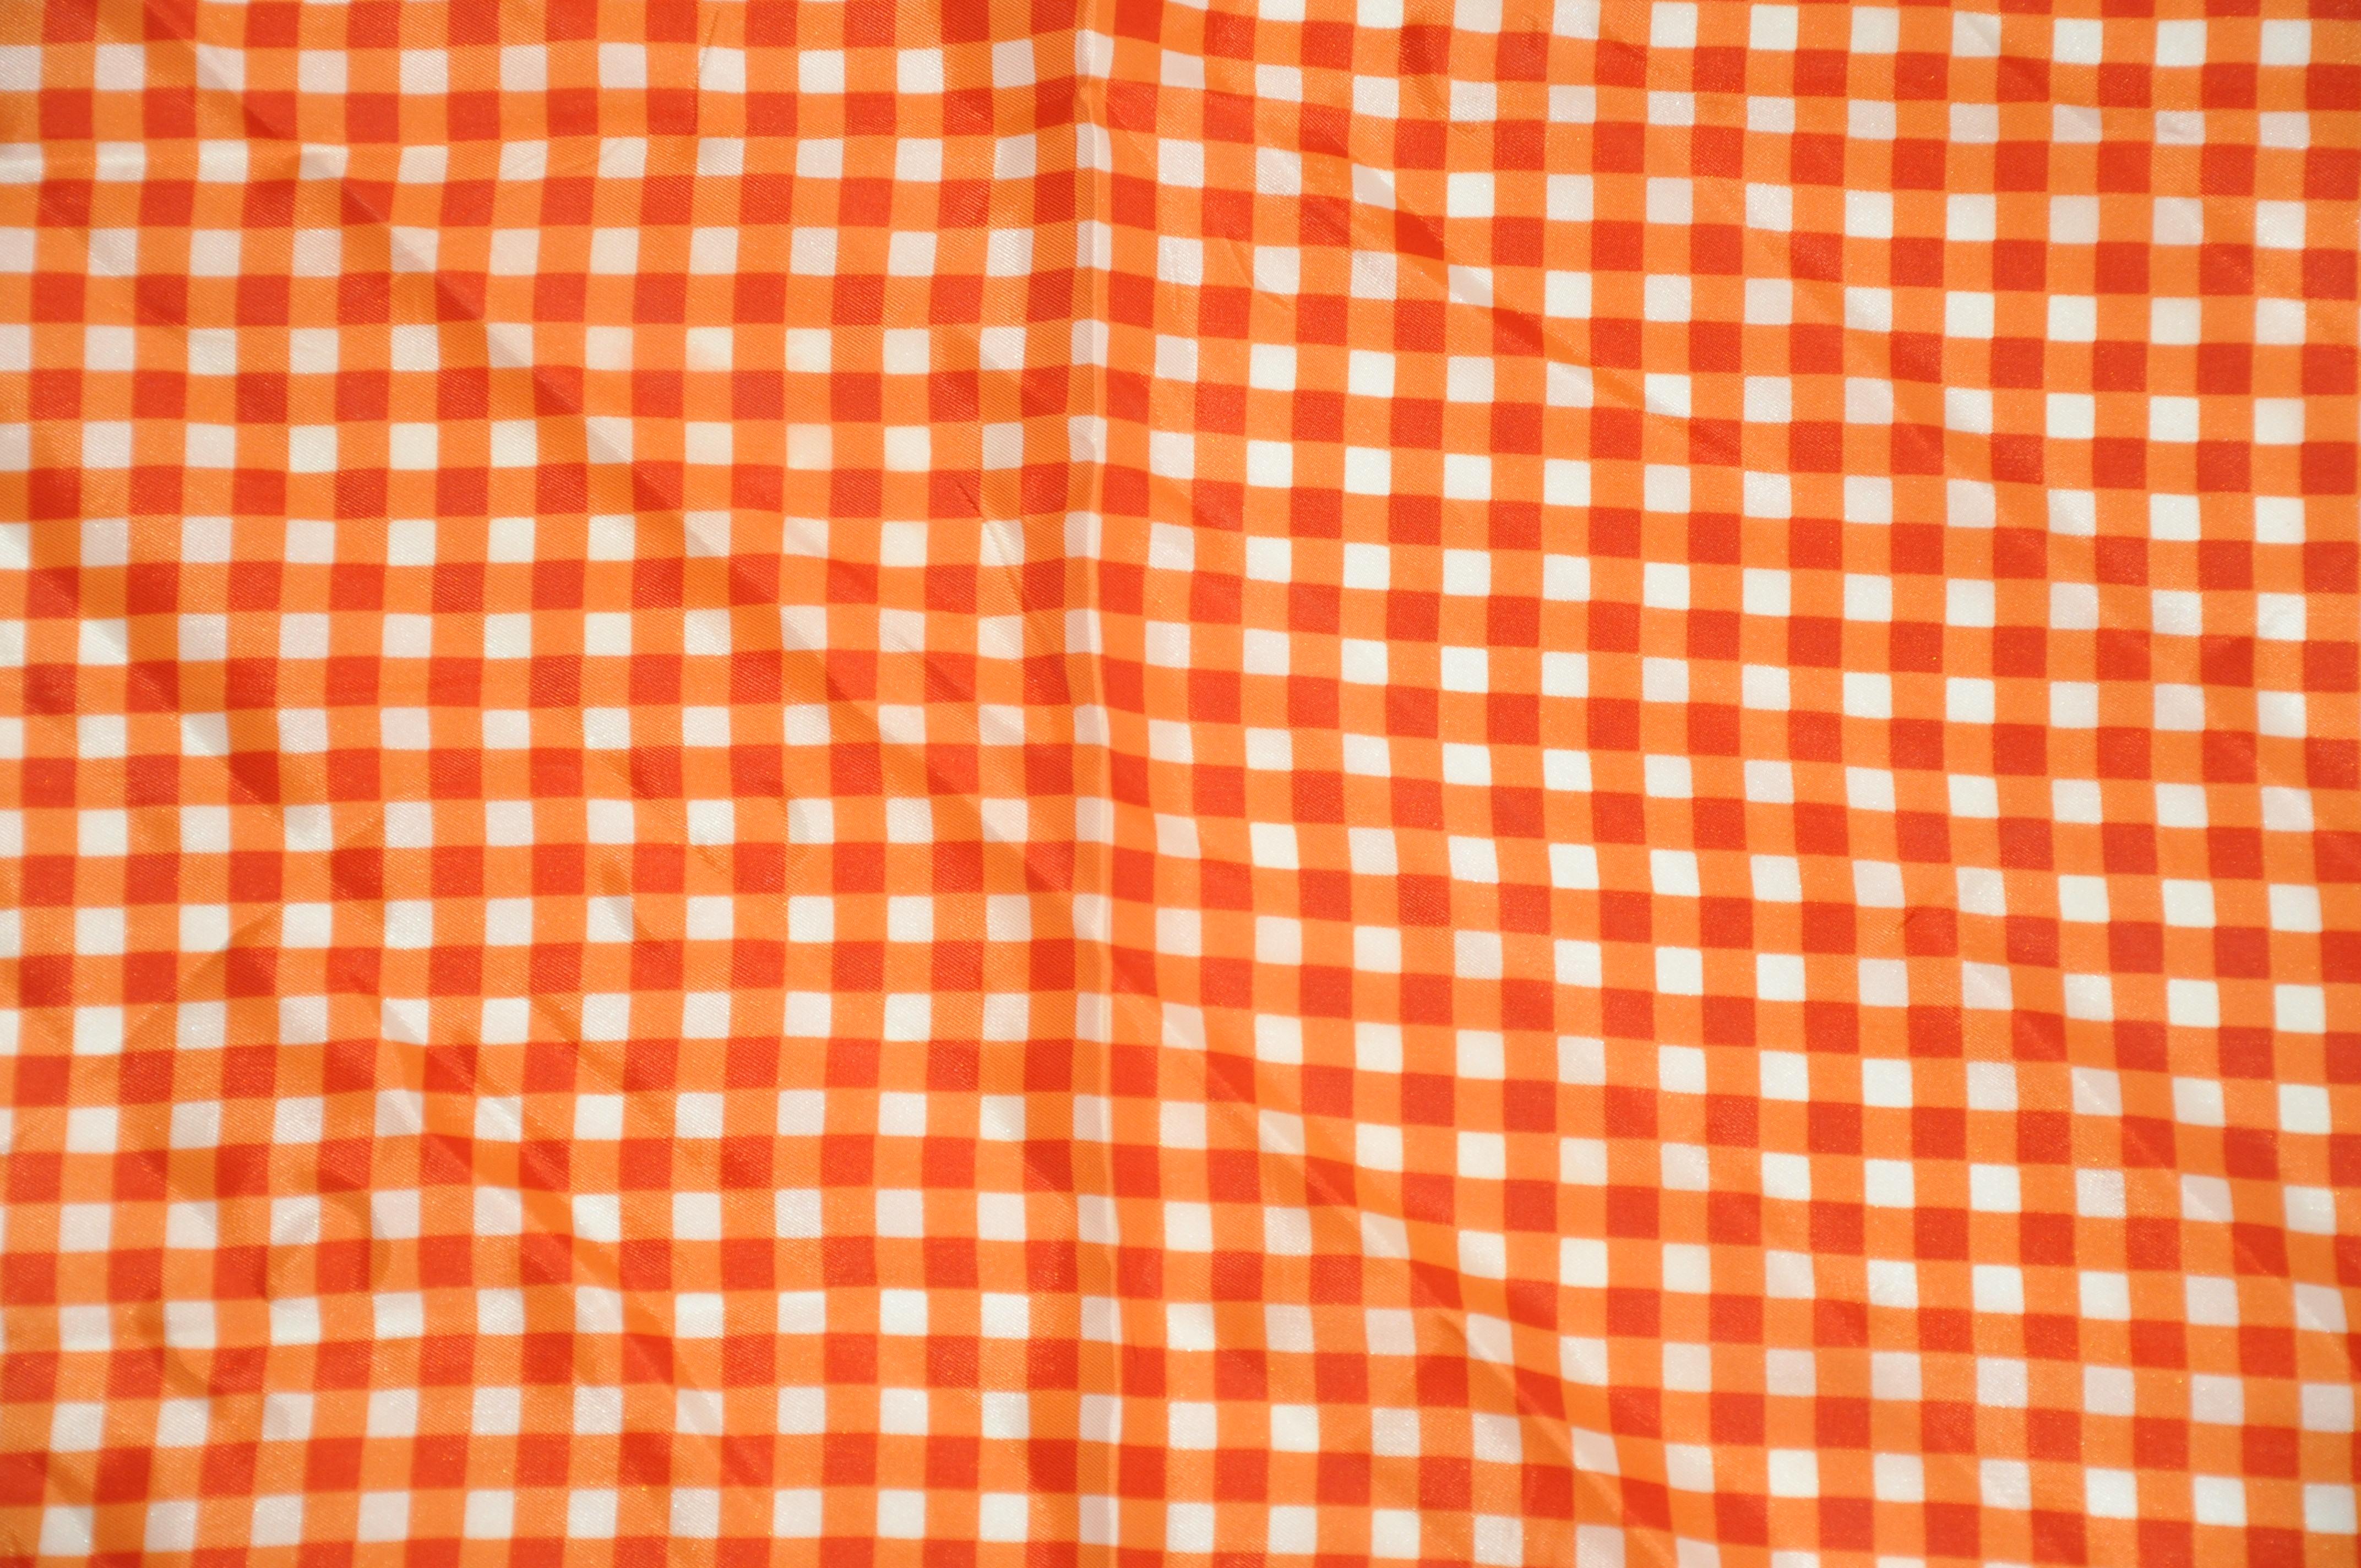      Glentex wonderful multi-stripe borders with red, tangerine and white checkered center scarf of acetate, measures 23inches by 23 inches. Made in Japan.